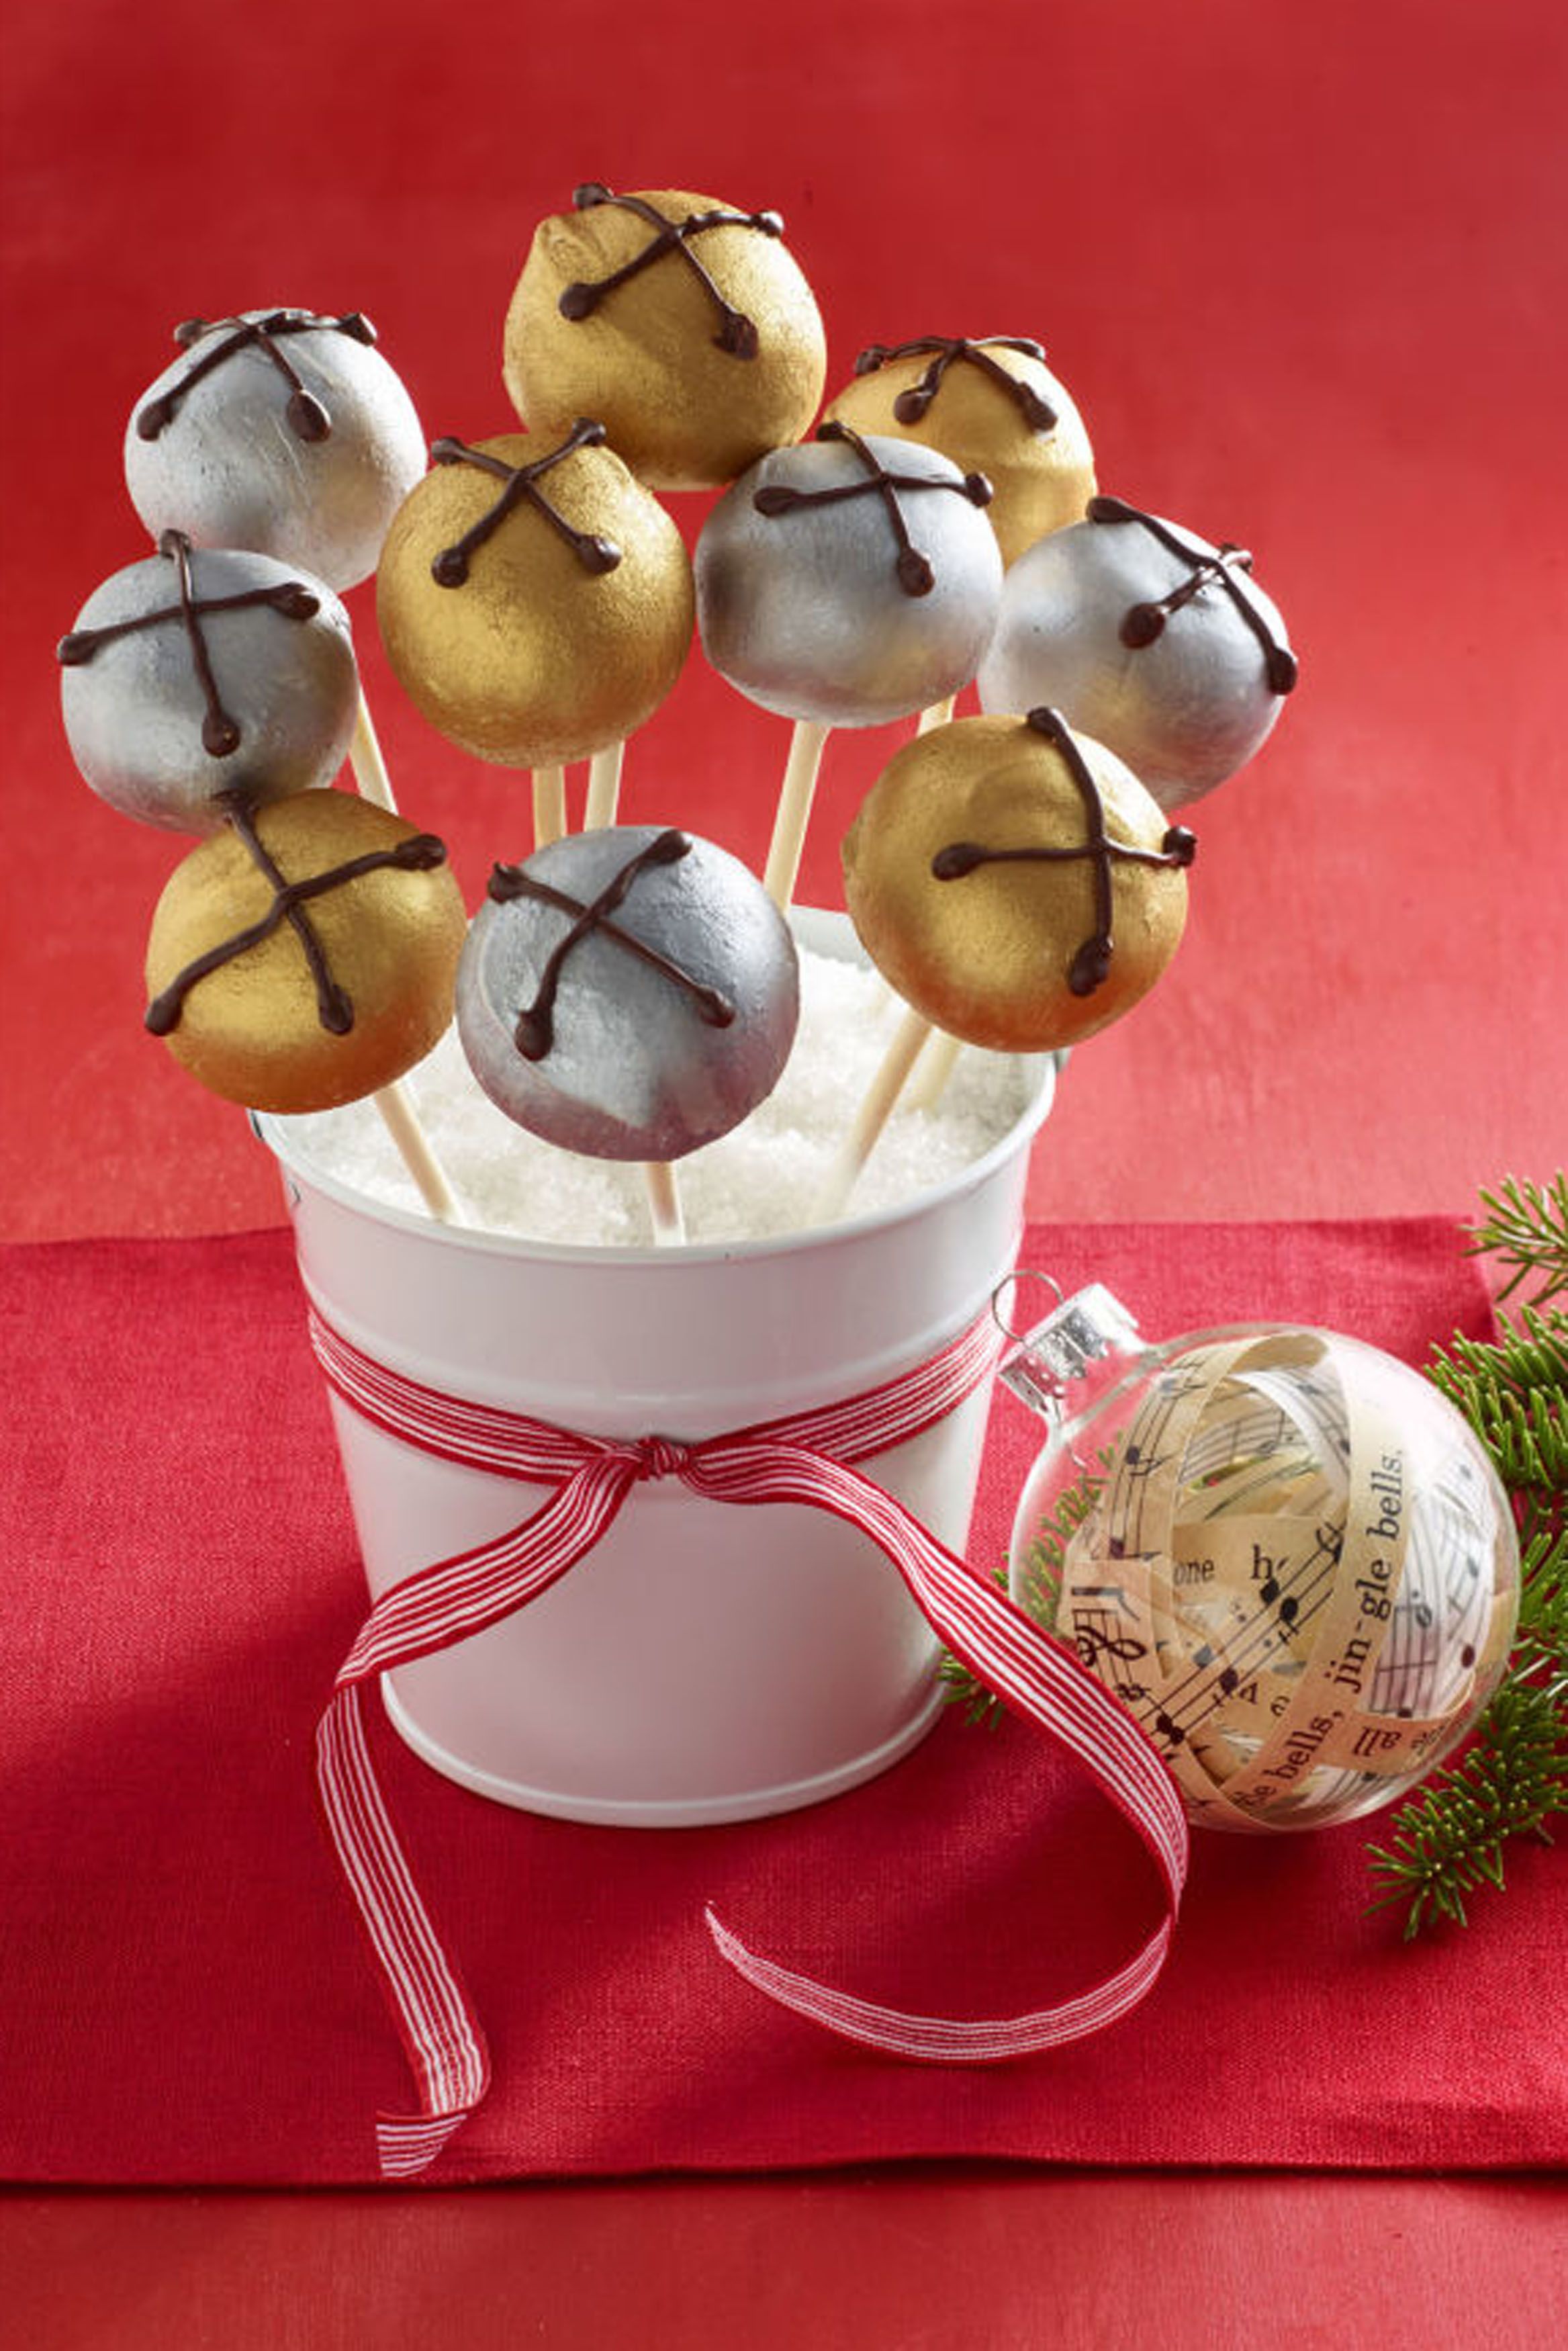 Cake pop maker expands to grocery stores | Supermarket Perimeter